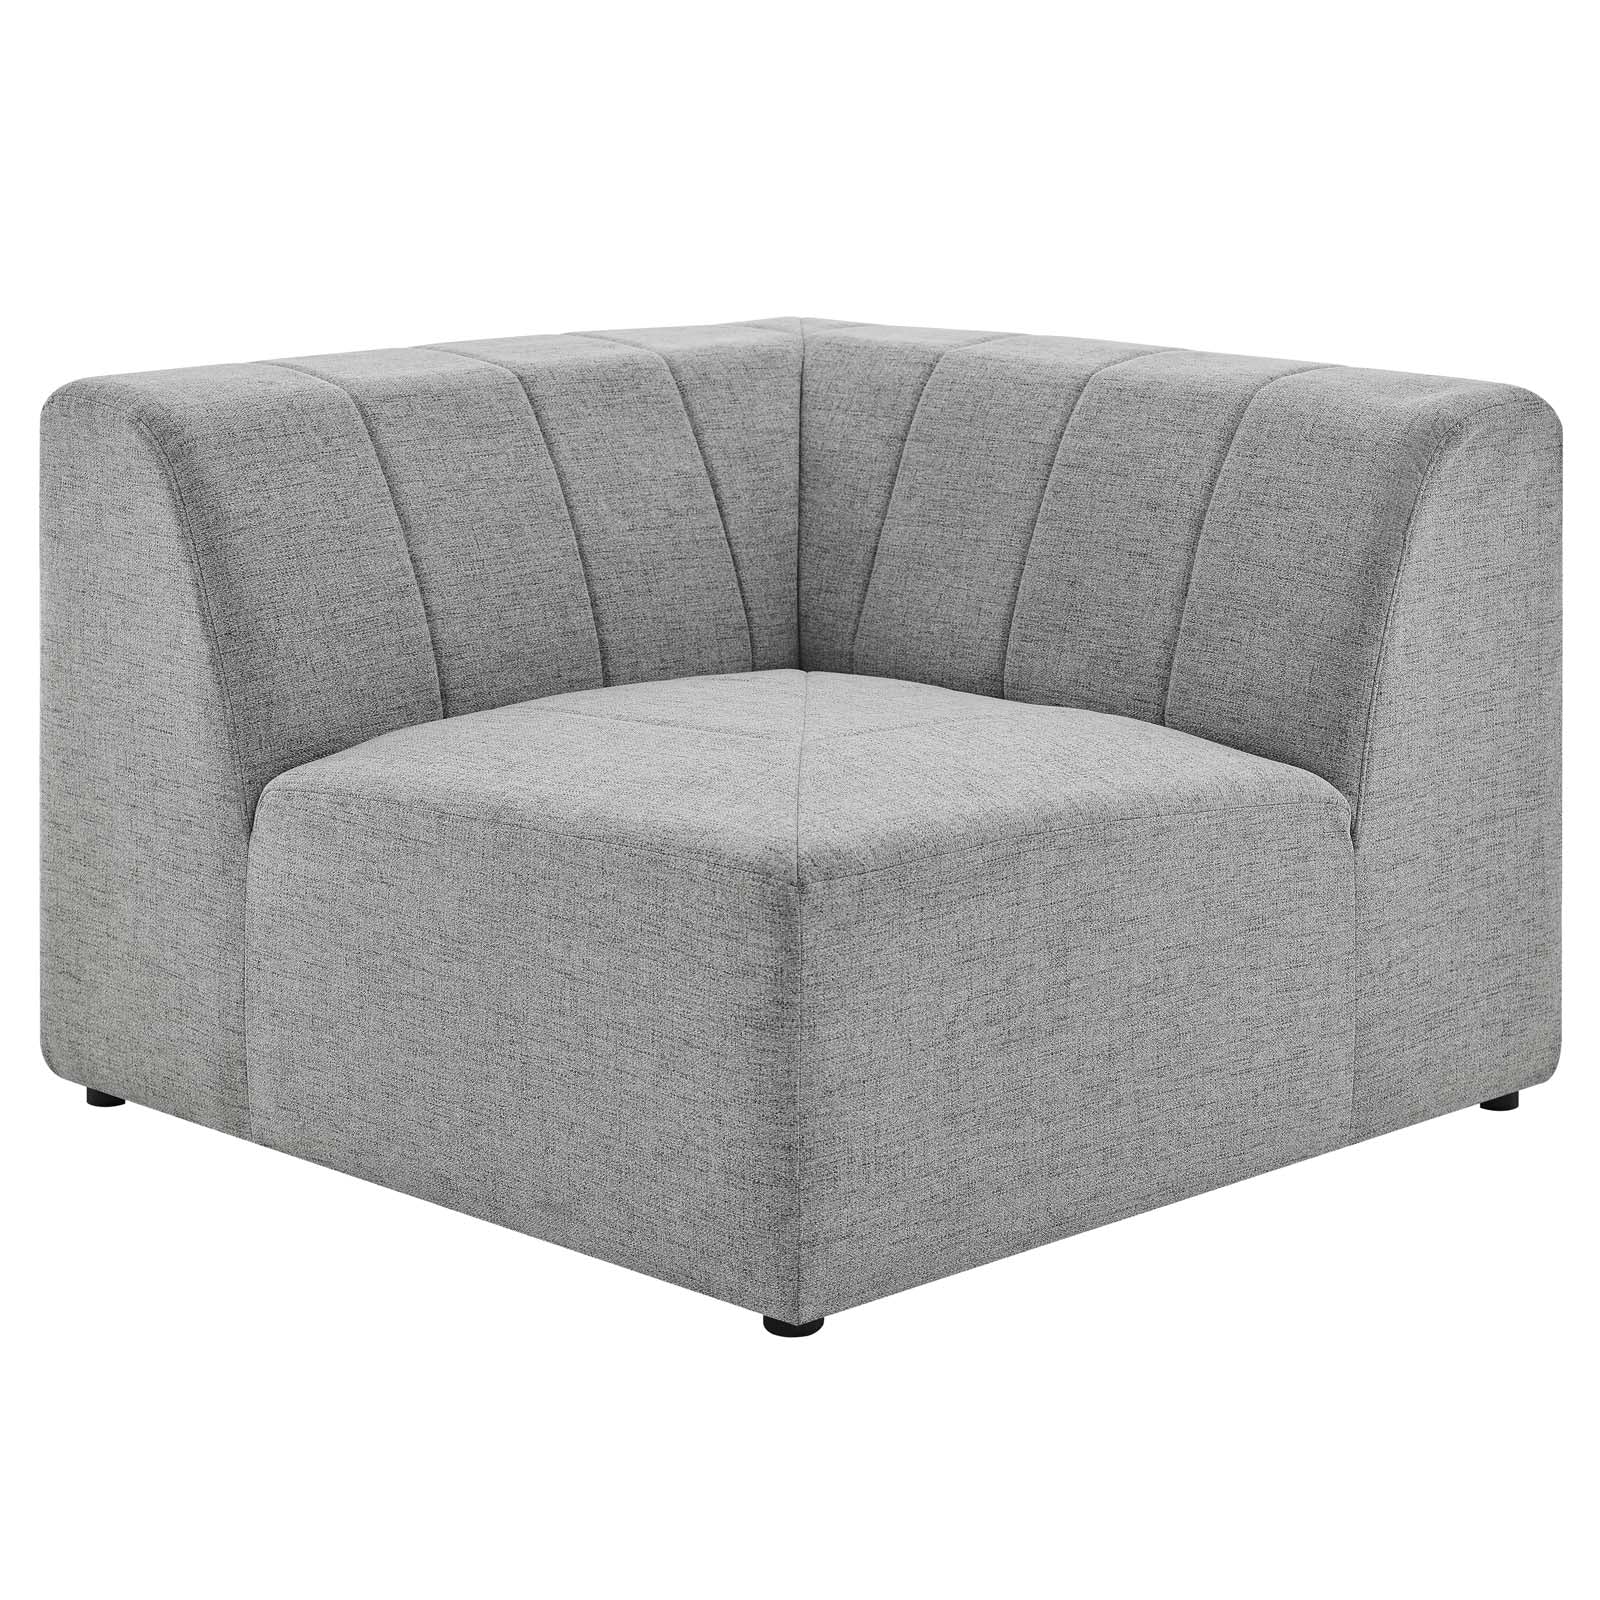 Modway Sectional Sofas - Bartlett Upholstered Fabric 4-Piece Sectional Sofa Light Gray